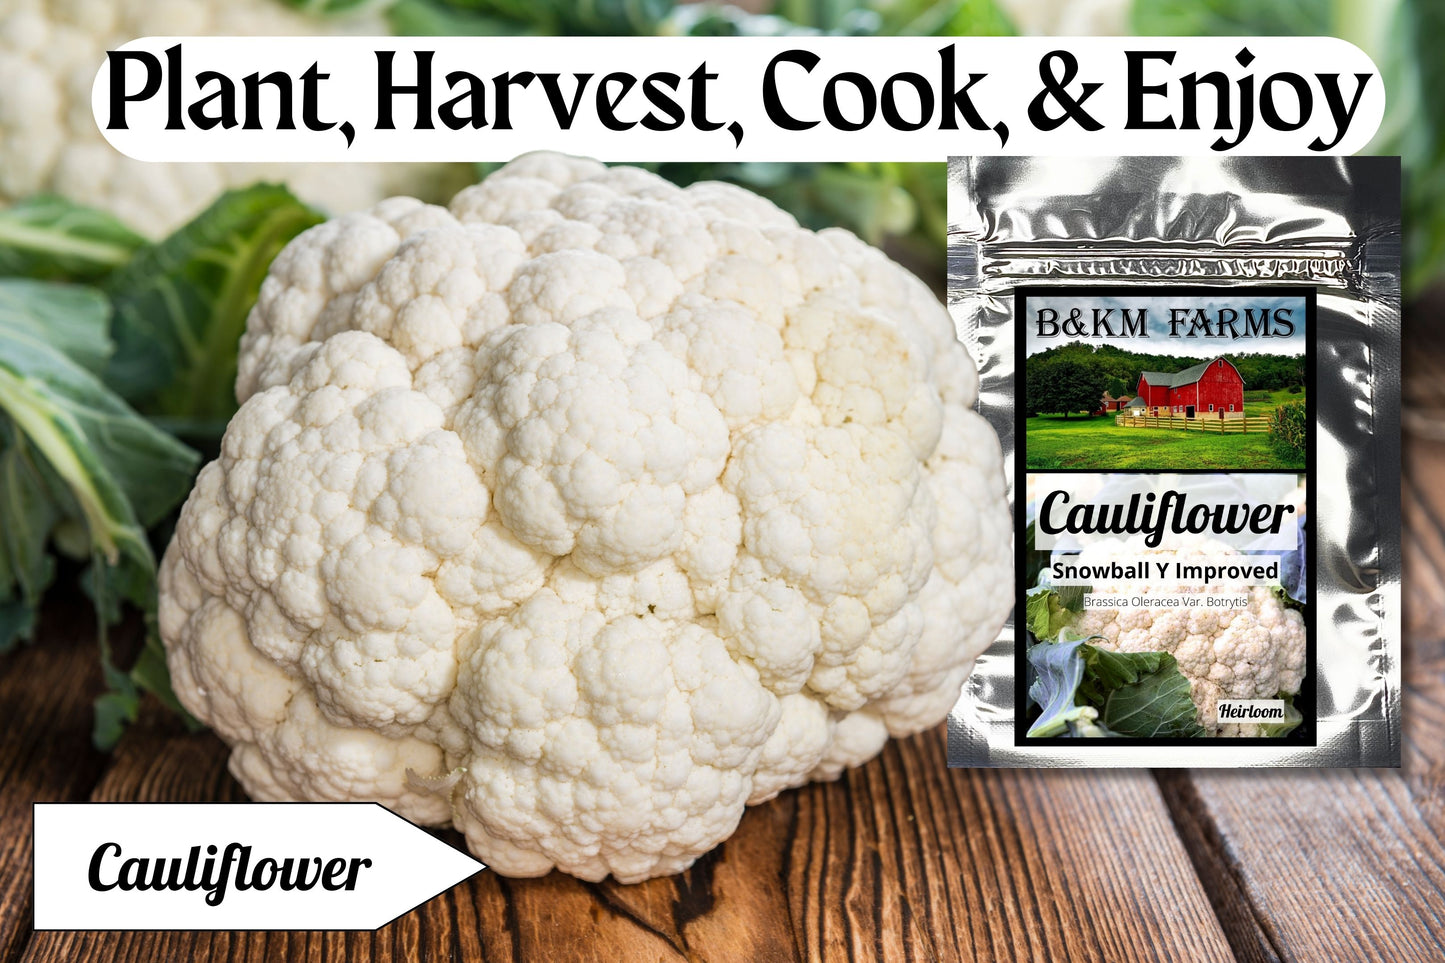 Cauliflower Snowball Y Improved: Winter Whites Worth Waiting For